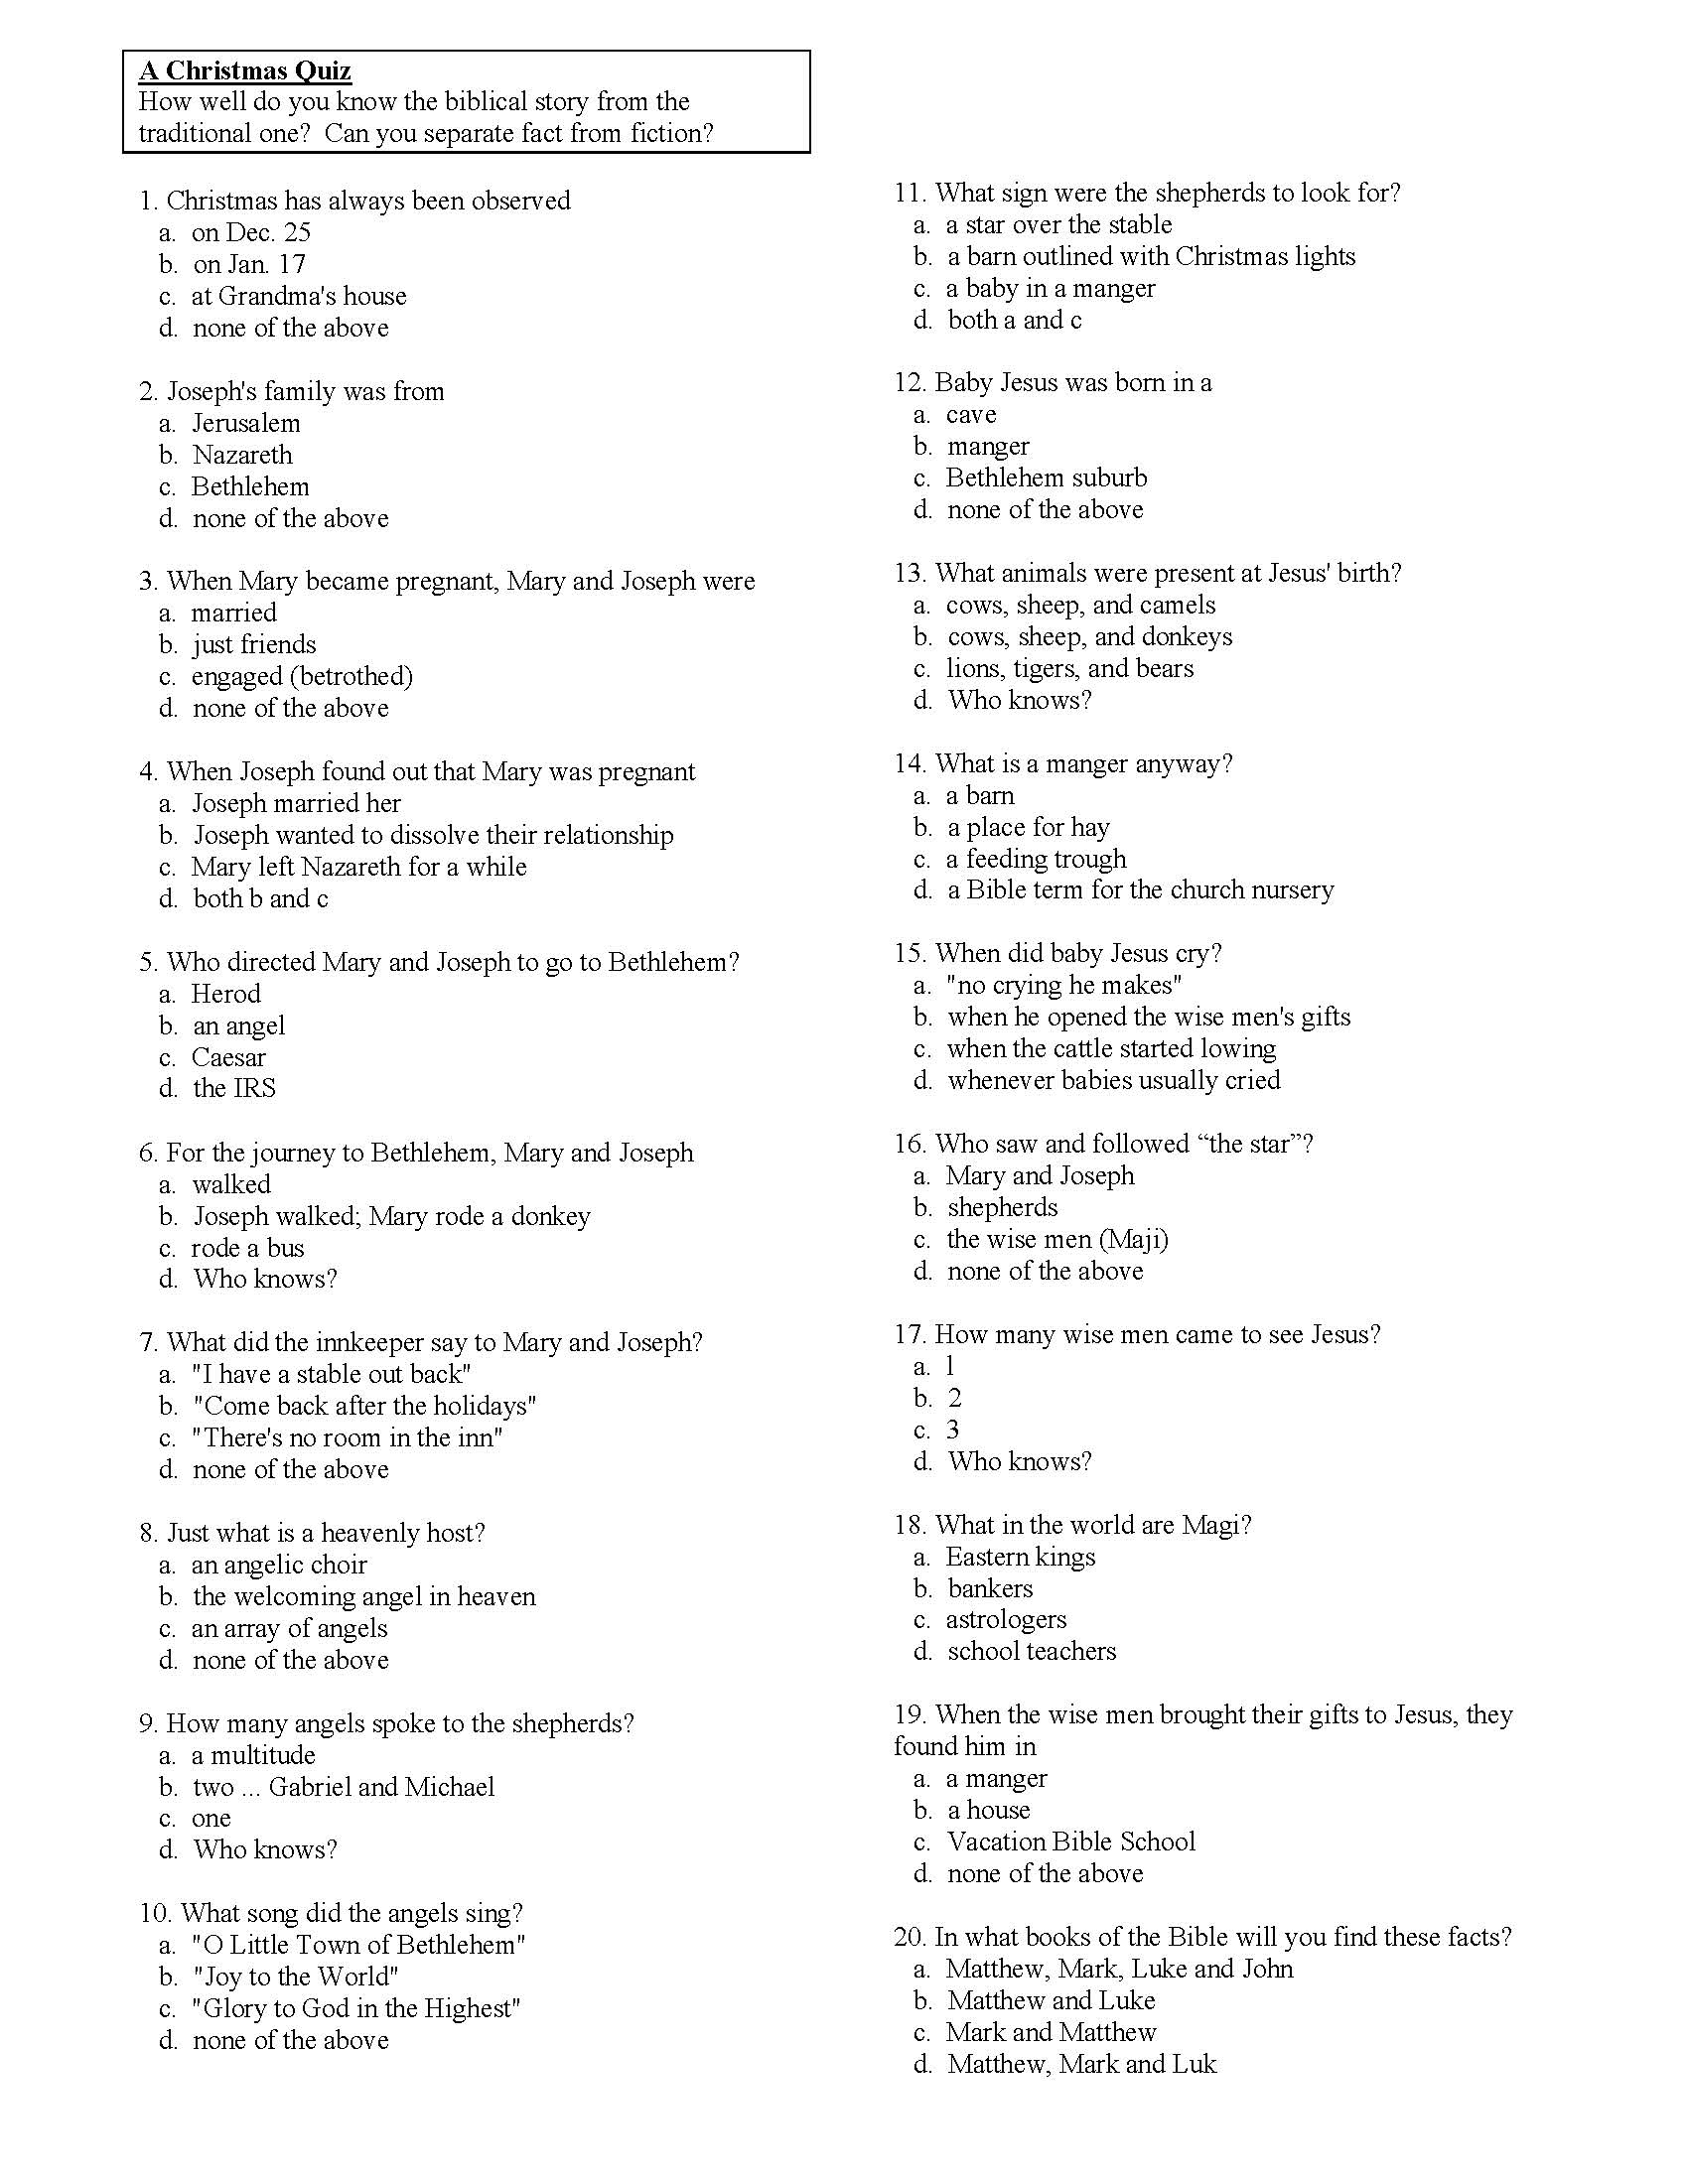 A Christmas Story Trivia Questions and Answers Printable That are Gratifying | Obrien's Website